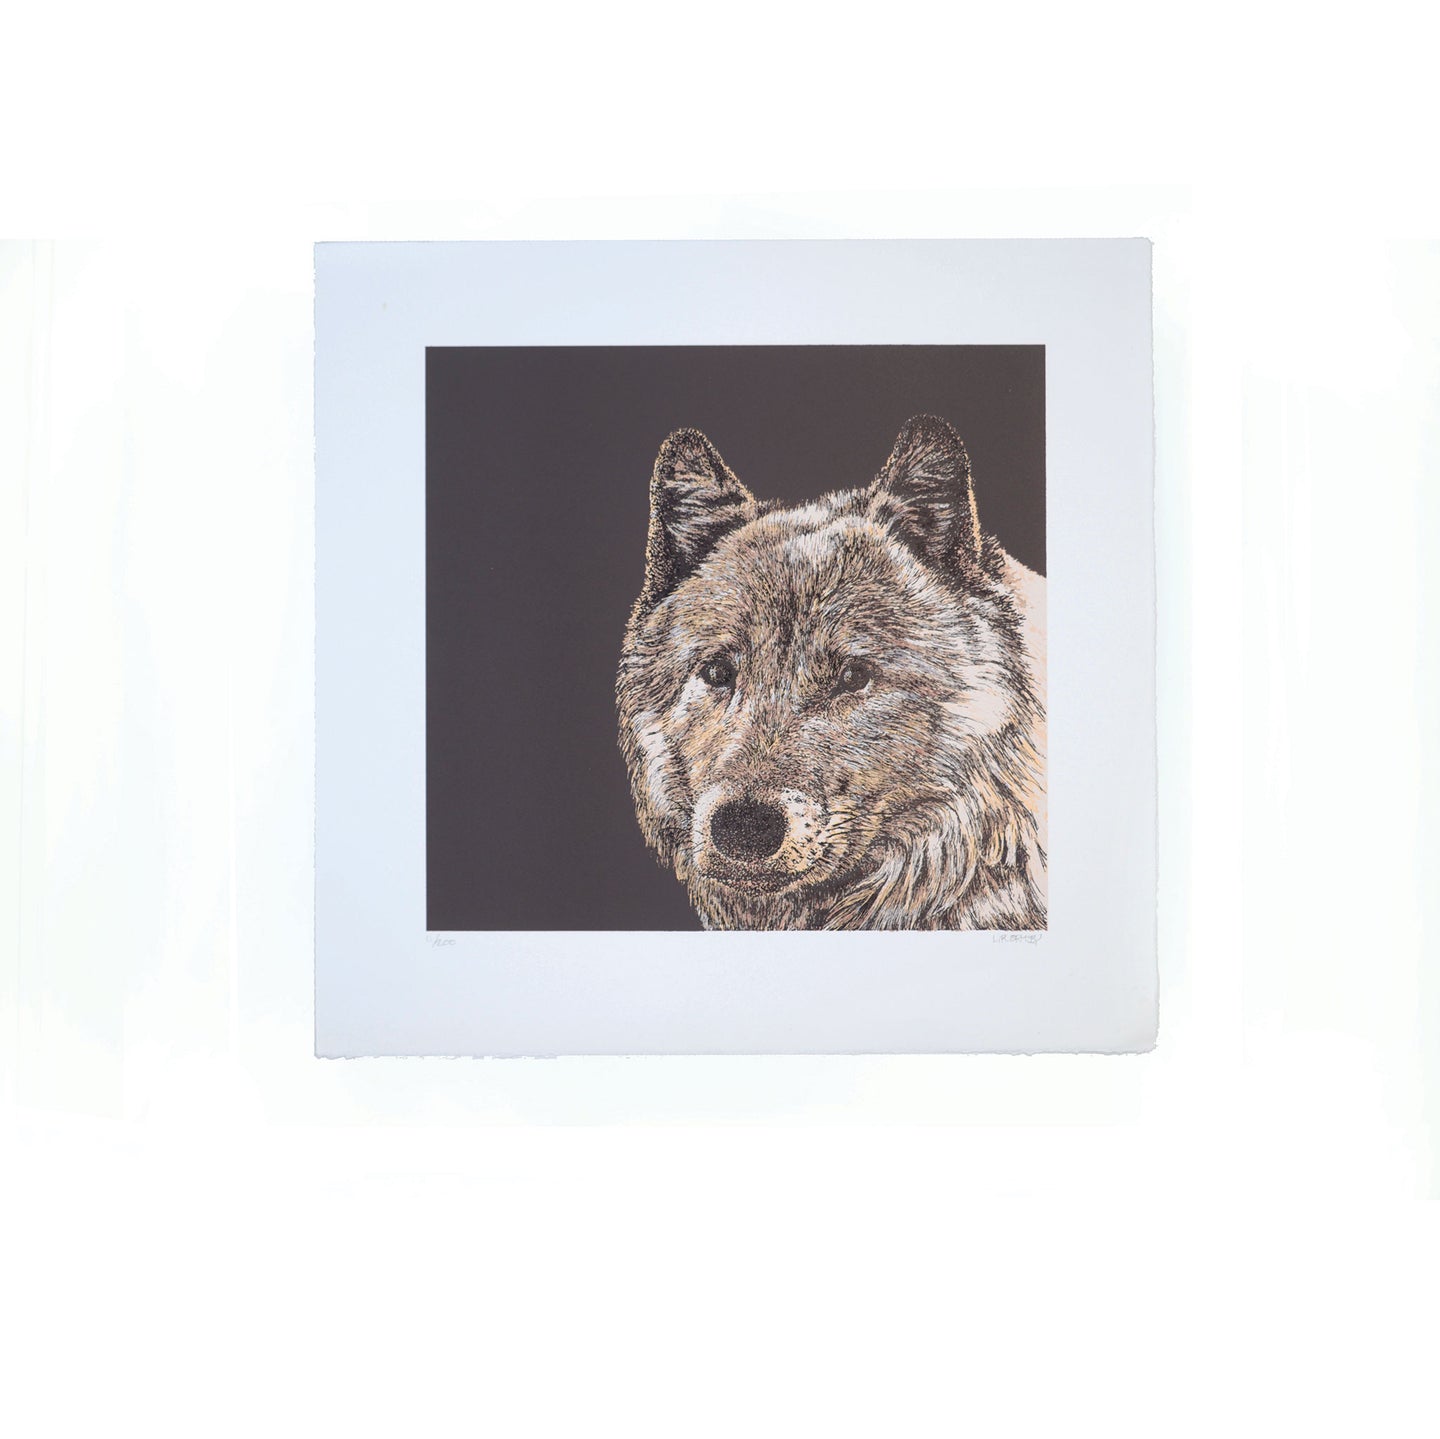 Gray Wolf lithograph, Yellowstone National Park, Wyoming